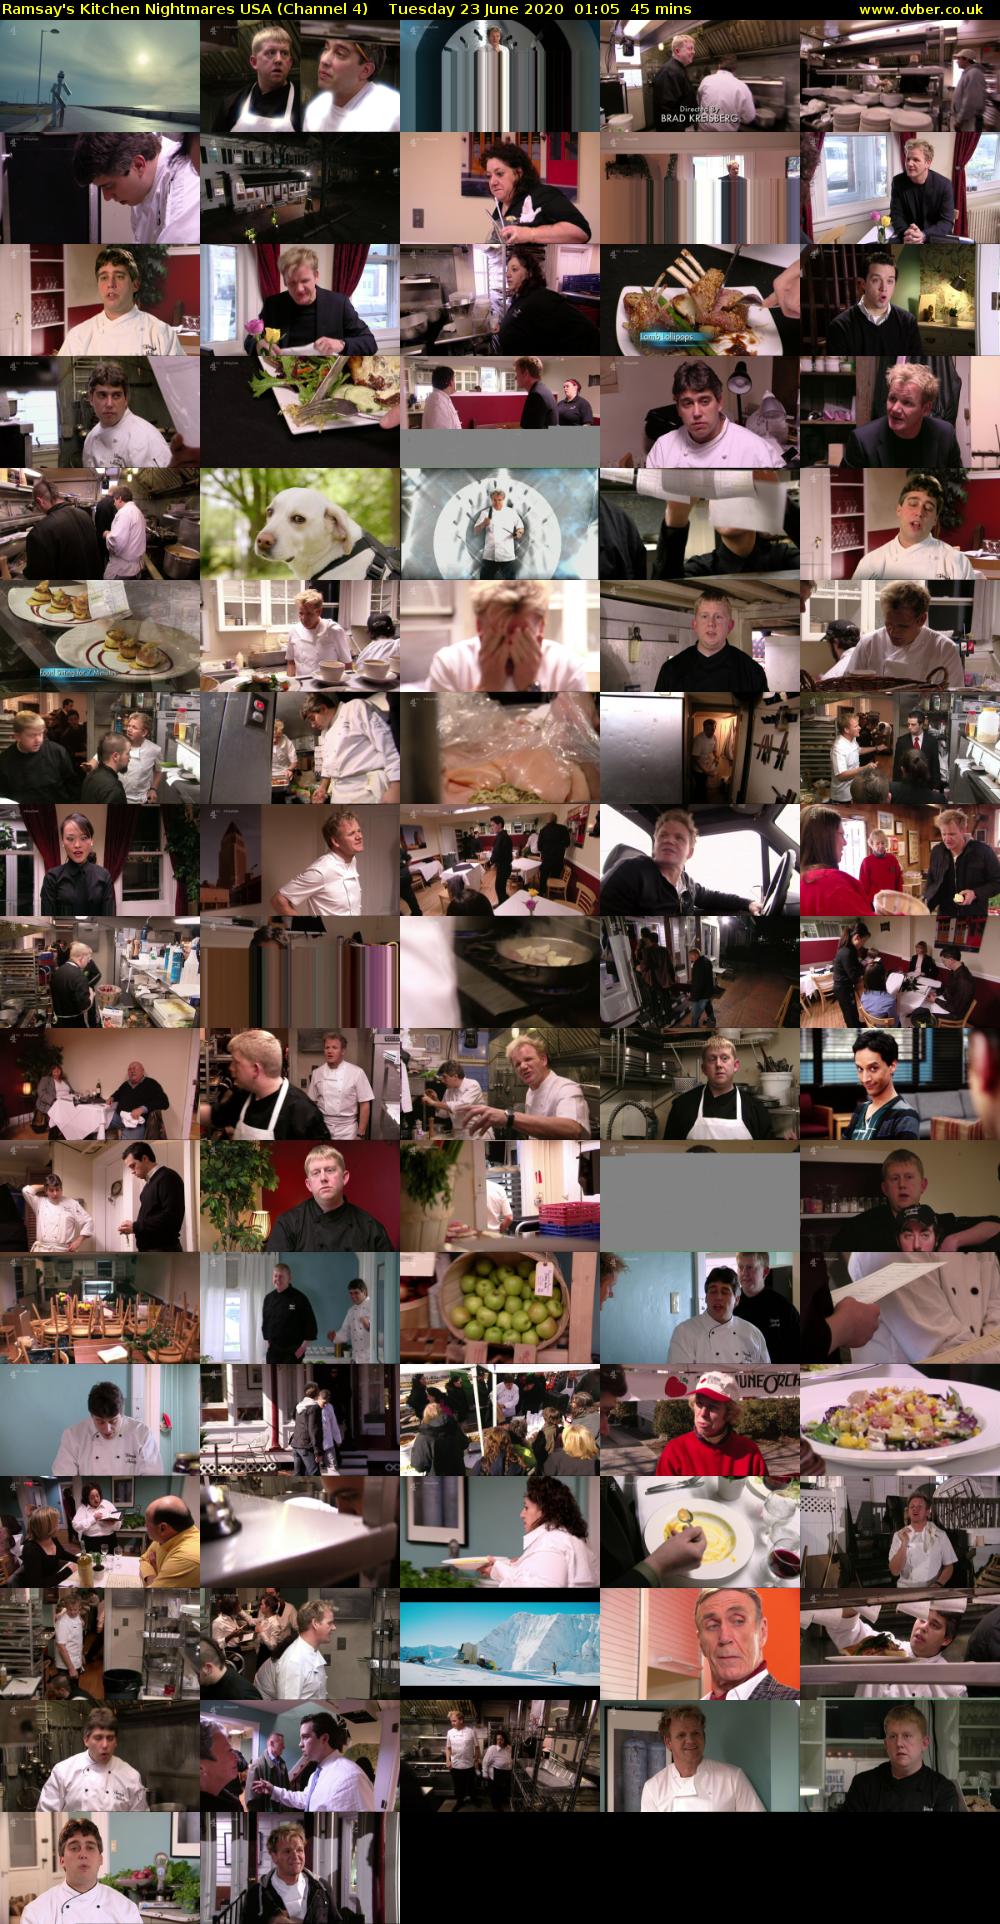 Ramsay's Kitchen Nightmares USA (Channel 4) Tuesday 23 June 2020 01:05 - 01:50